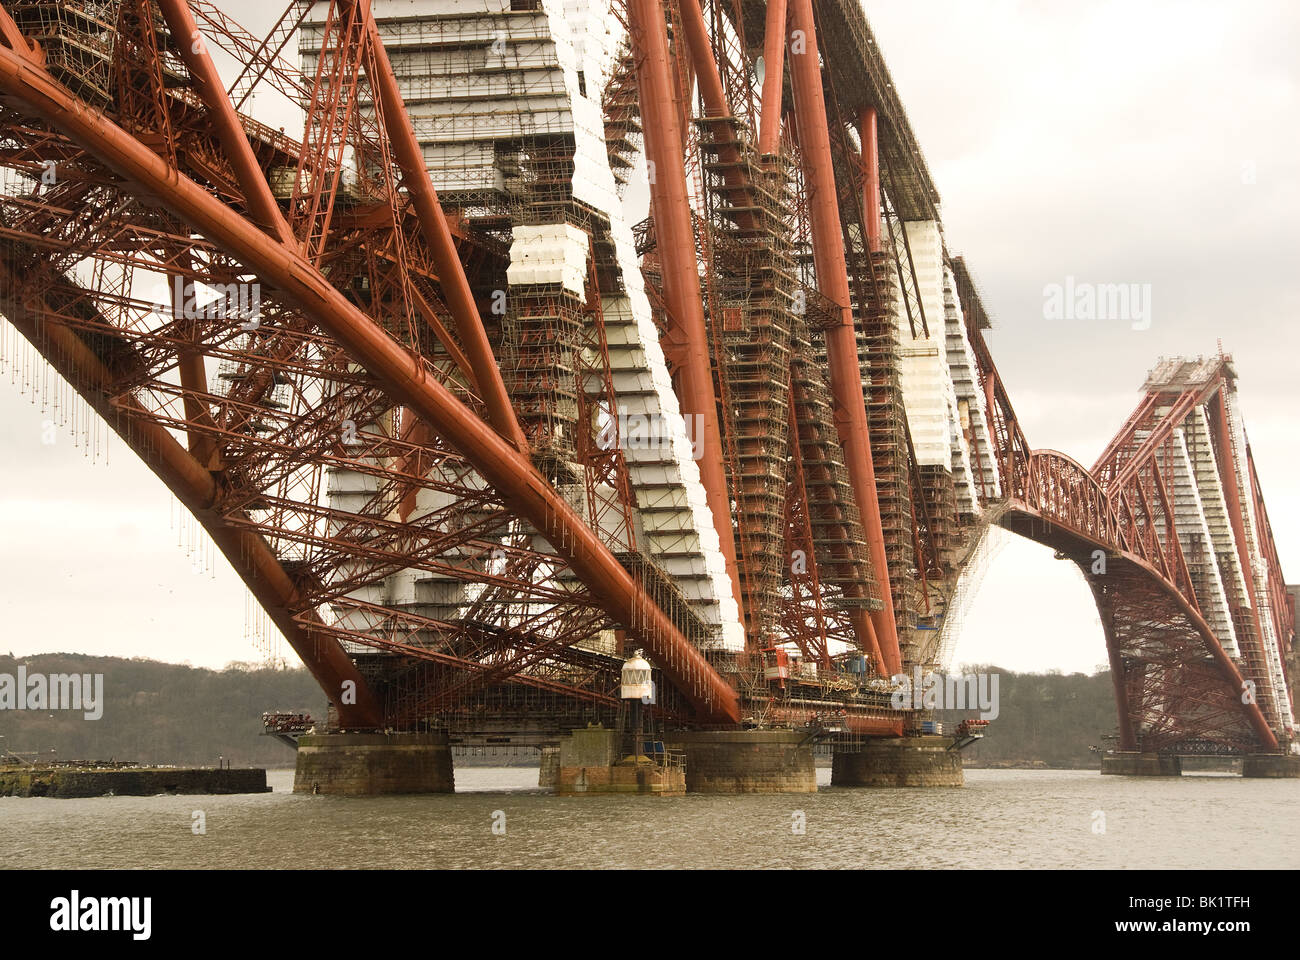 Maintenance work being carried out on Forth Railway Bridge. Stock Photo